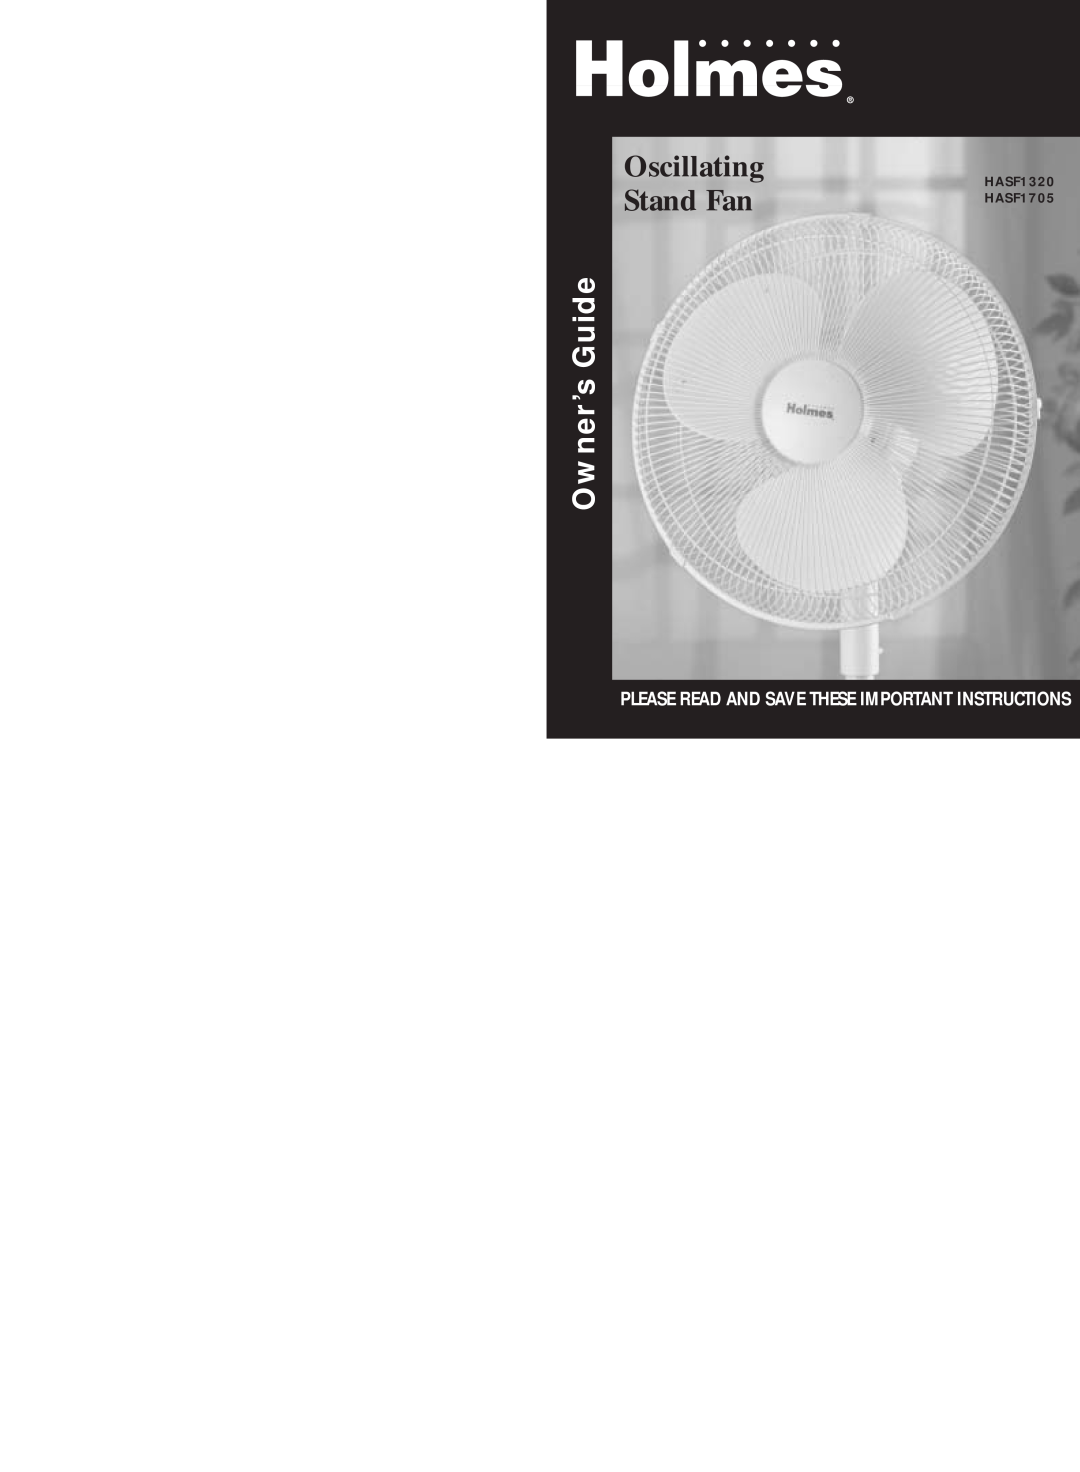 Holmes HASF1320, HASF1705 warranty Oscillating Stand Fan, Owner’s Guide, Please Read And Save These Important Instructions 